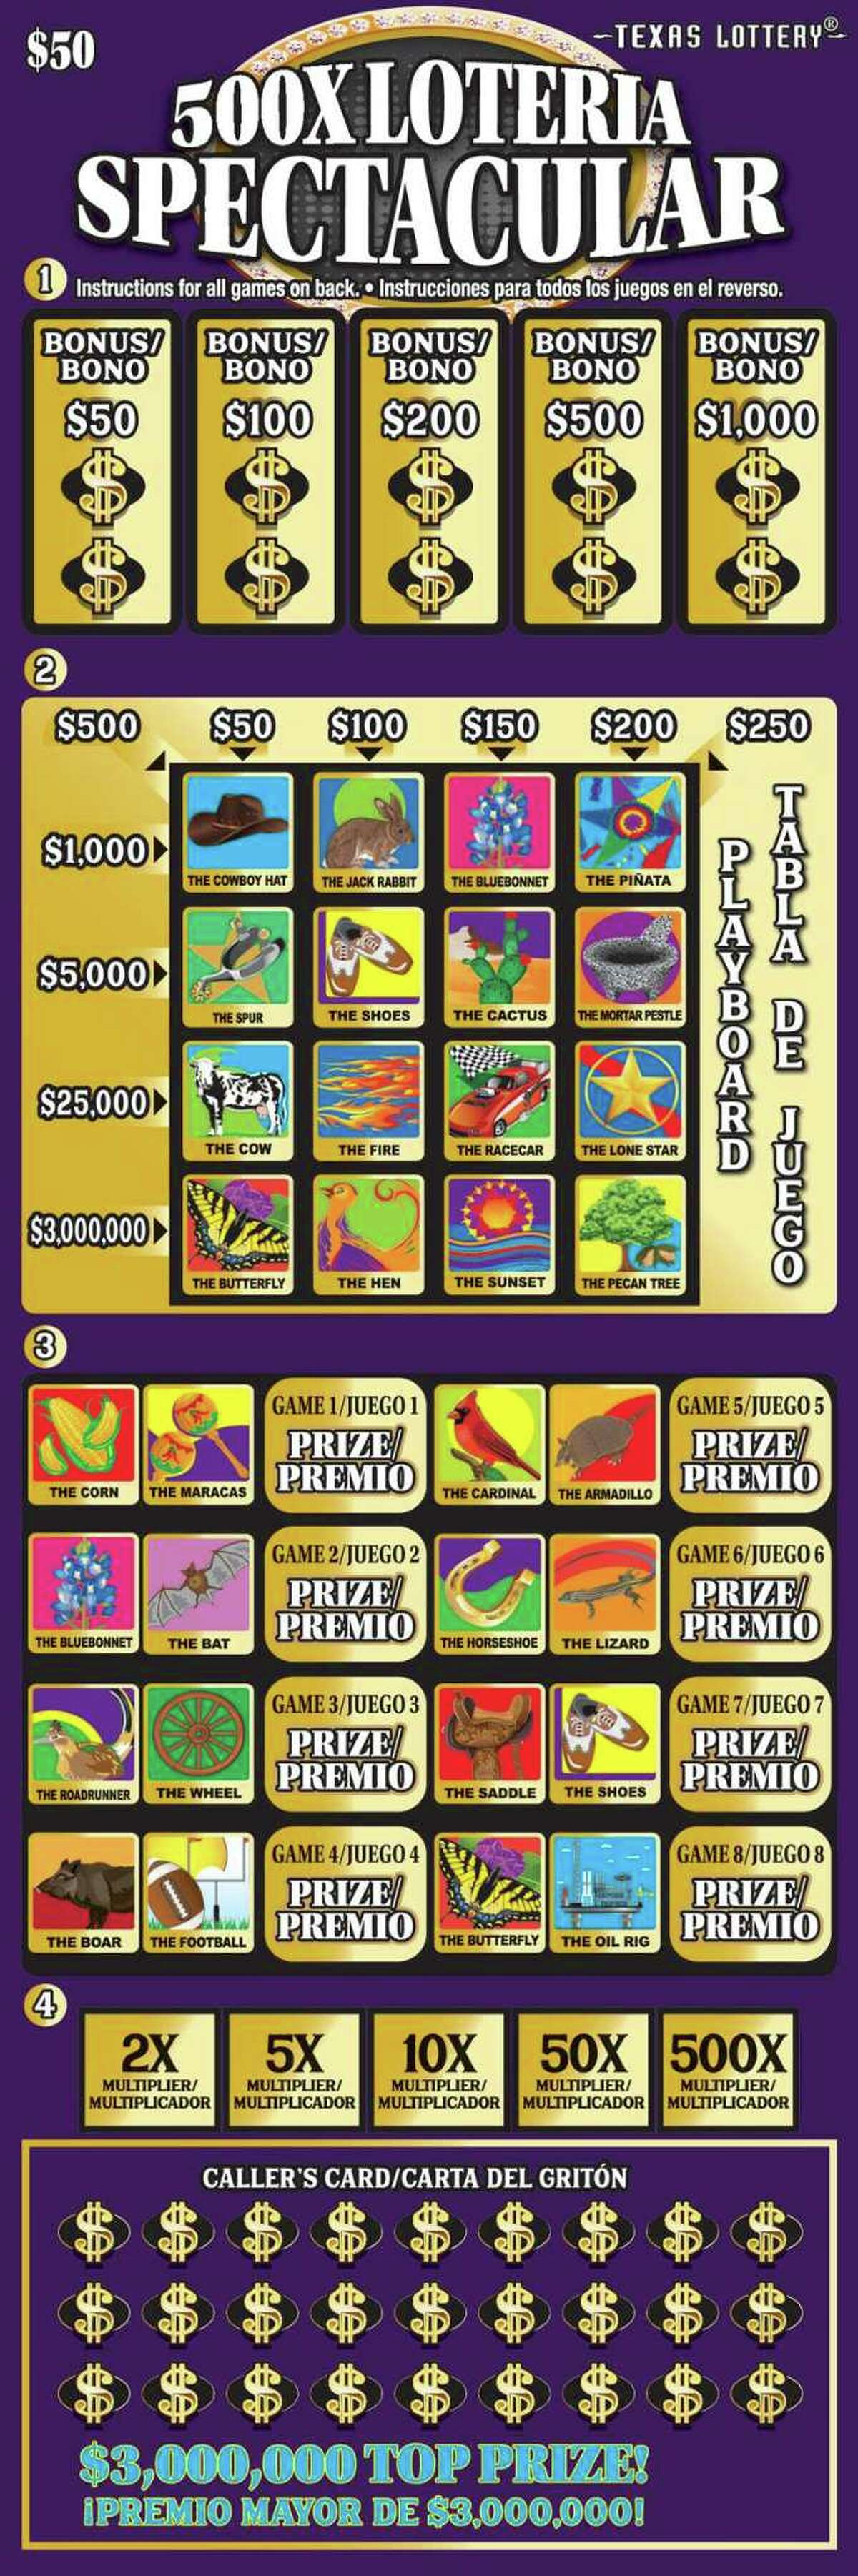 An unnamed San Antonio resident won $3 million in the Texas Lottery scratch game 500x Loteria Spectacular.